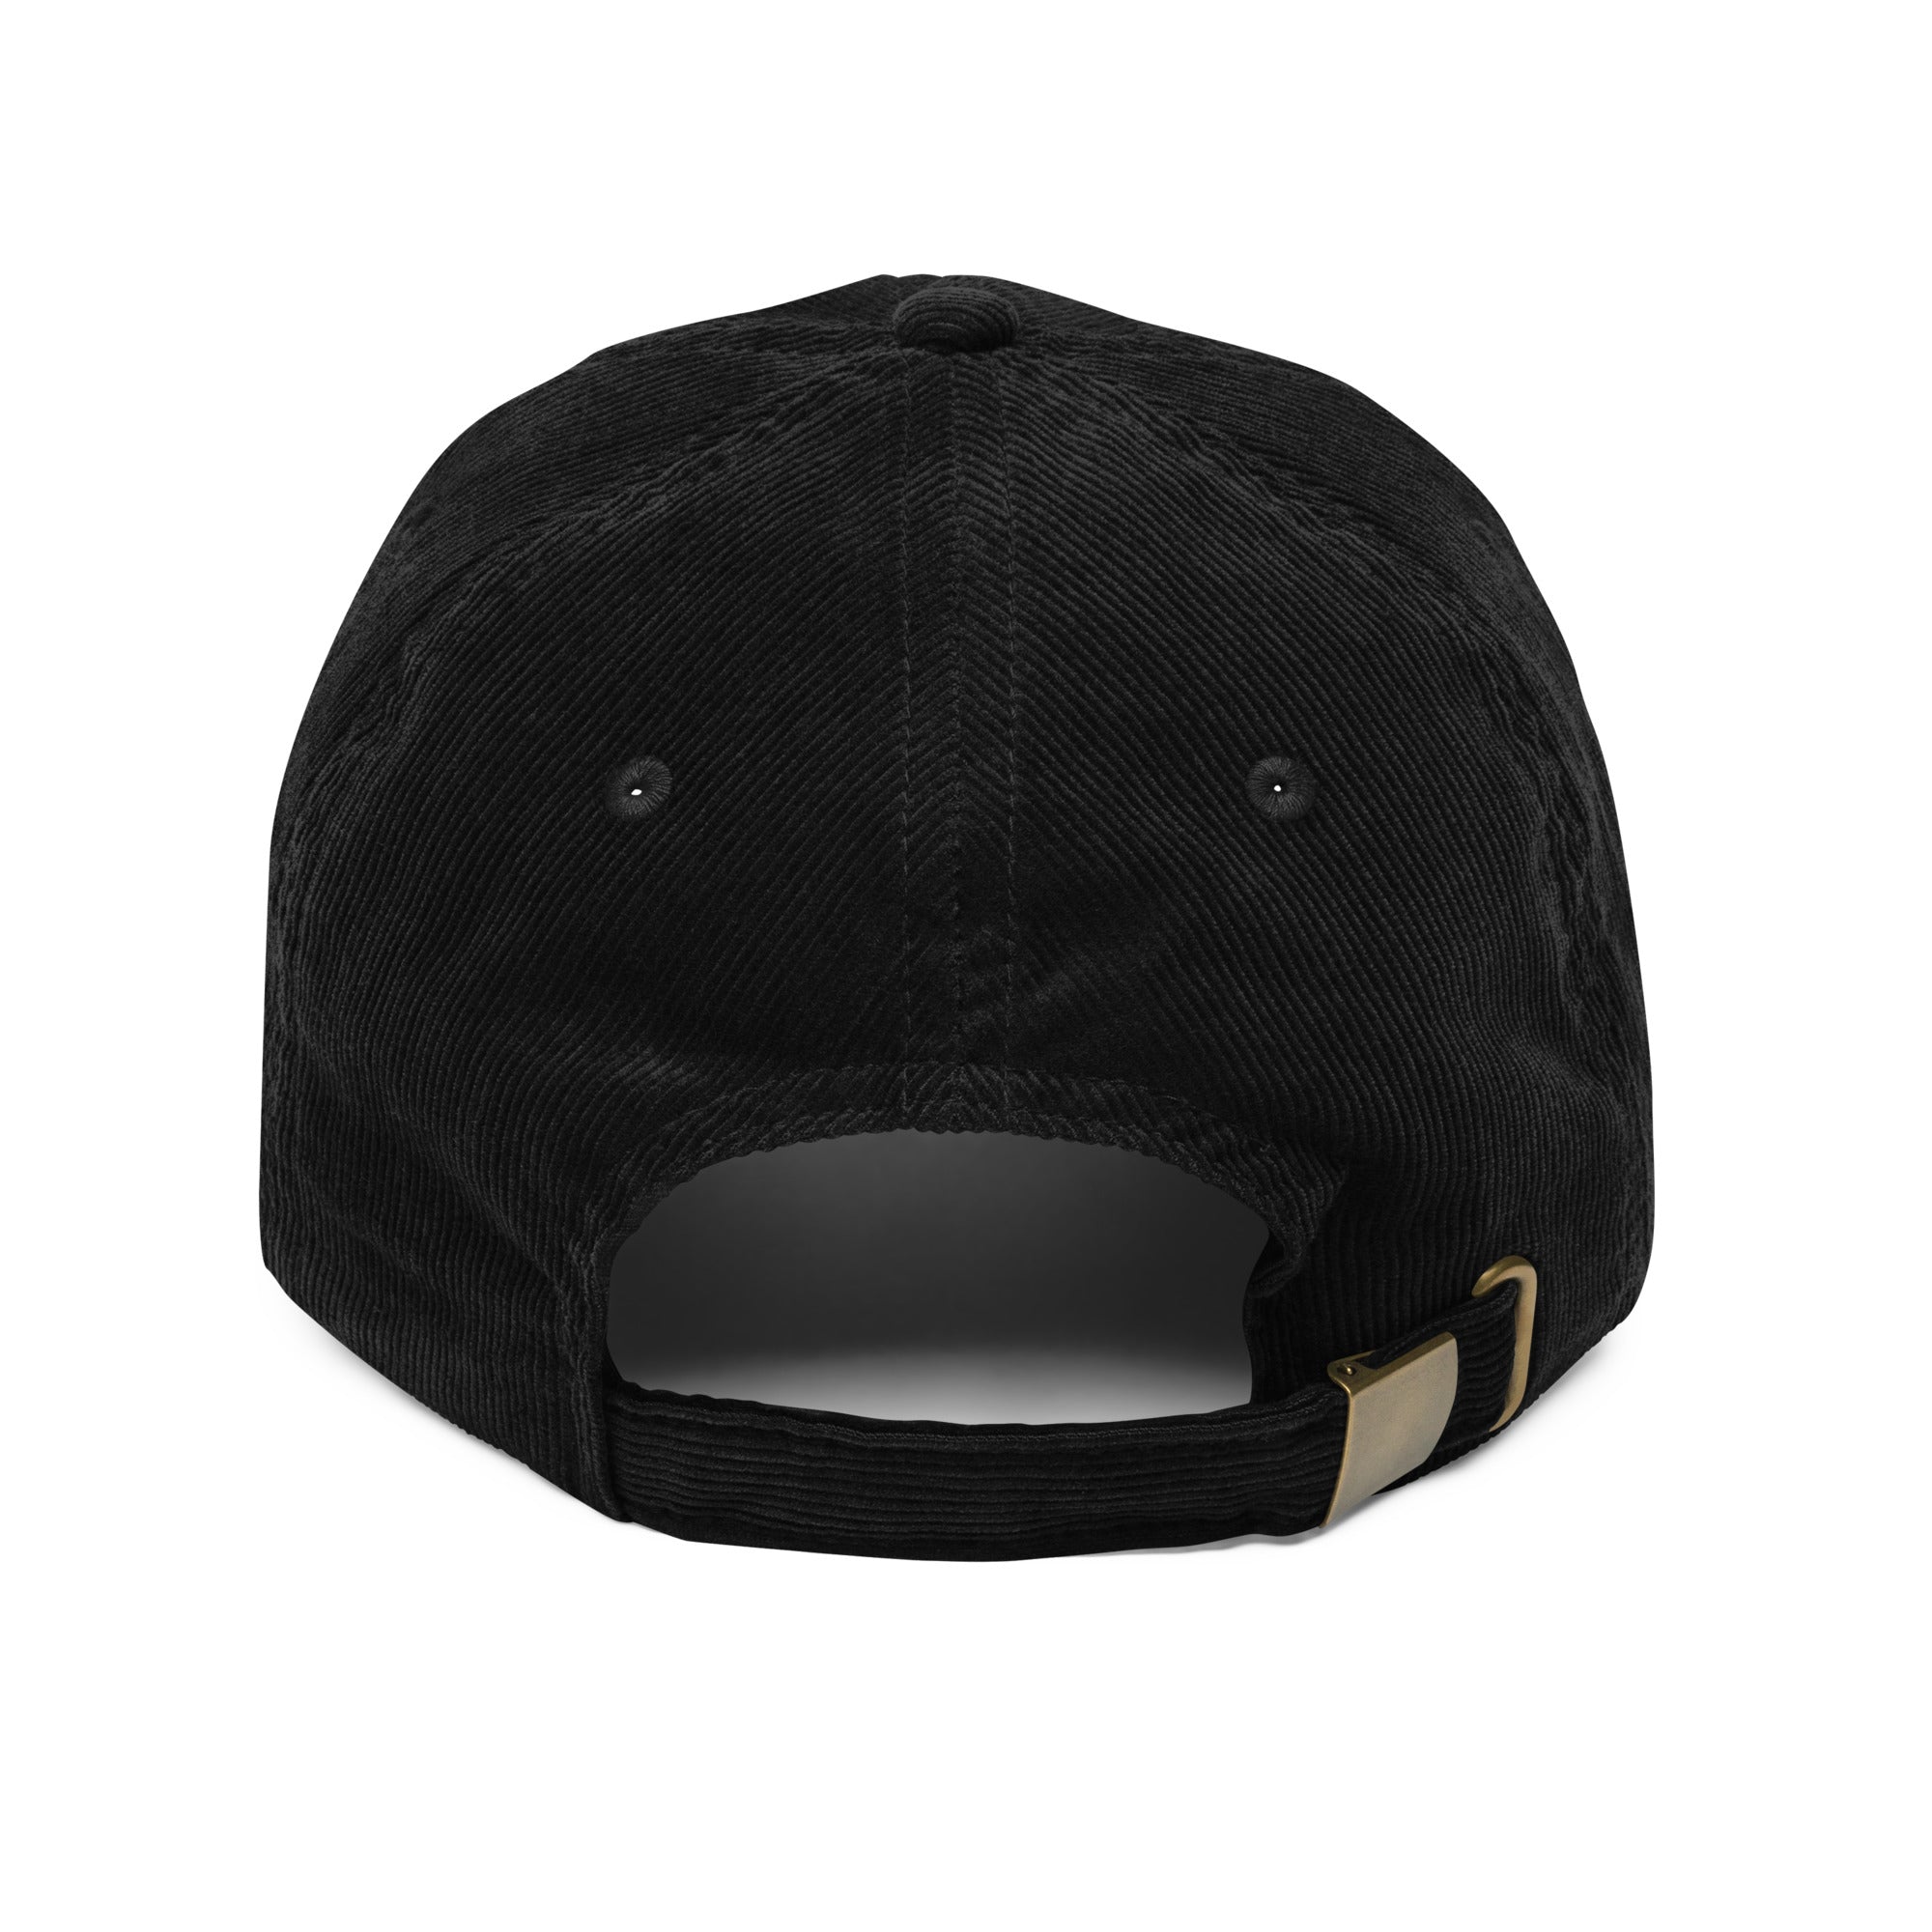 Anime Snapback Hat Cosplay Costume Luminous Horned Fitted Cap For Adults  Hip Hop Style Black Cotton Boys And Girls From Bj9g, $11.11 | DHgate.Com